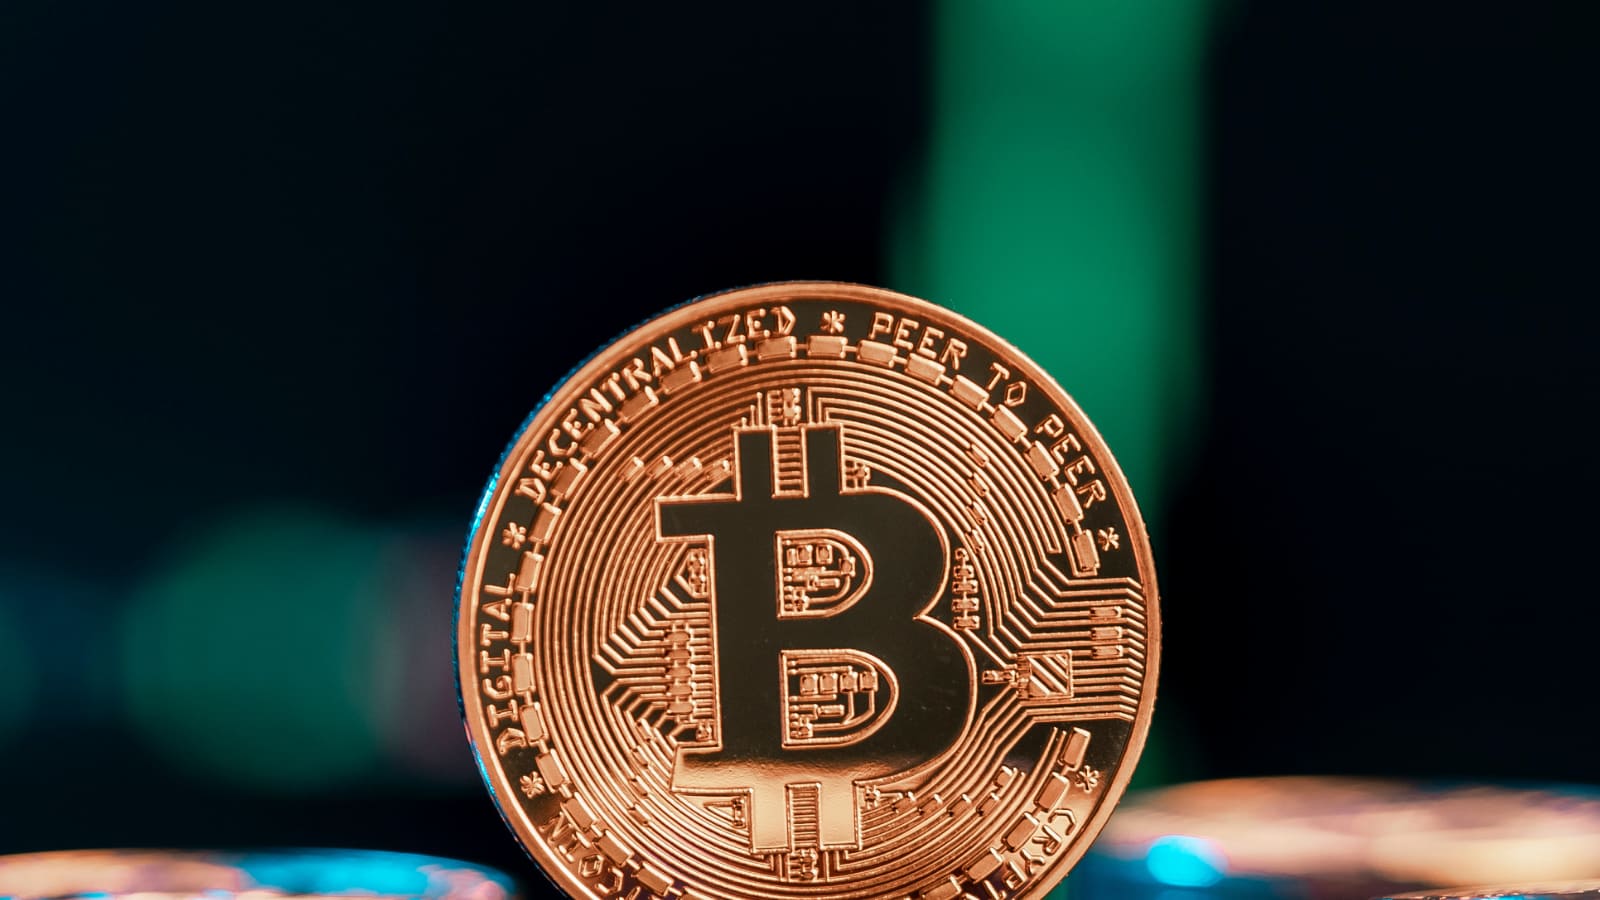 Bitcoin Price Remains Virtually Unchanged While Trading Volume Tops $13 Billion. Who Is In The BTC Market?